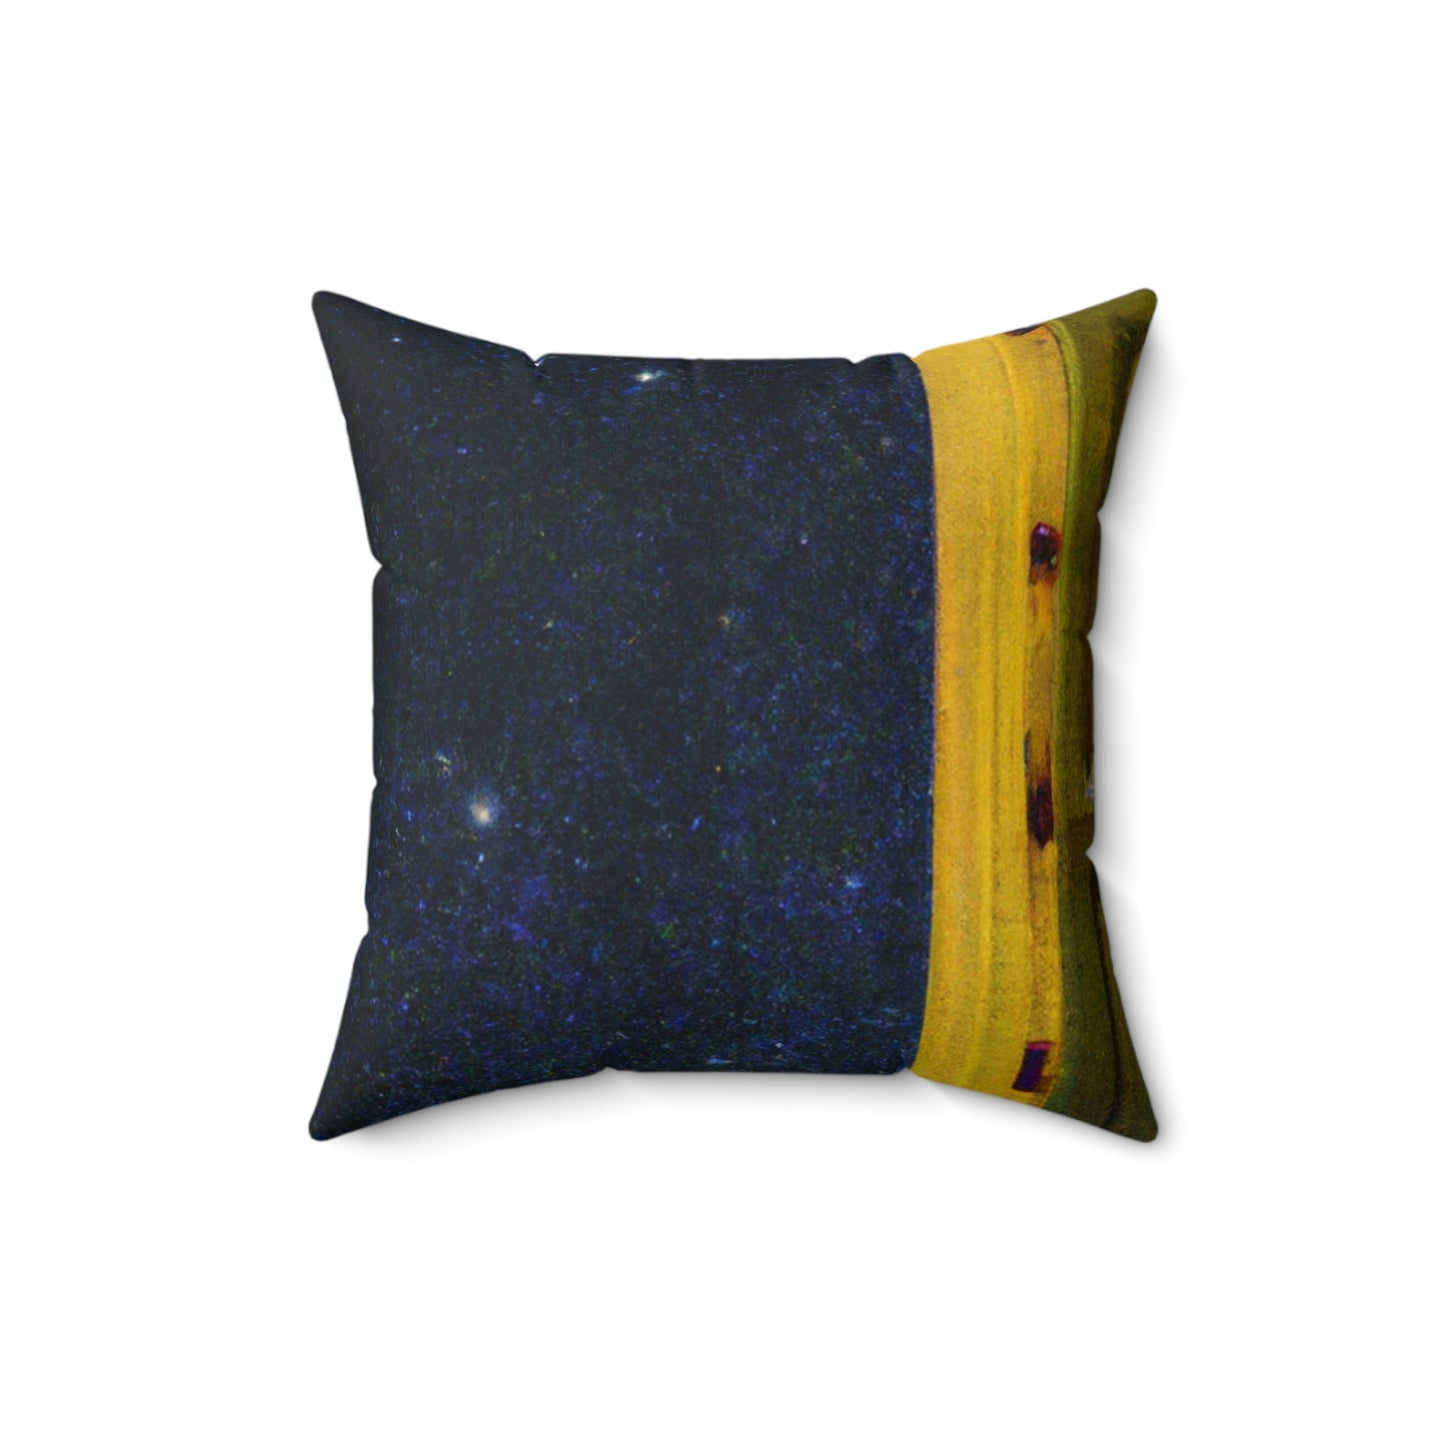 The Heavenly Threshold - The Alien Square Pillow